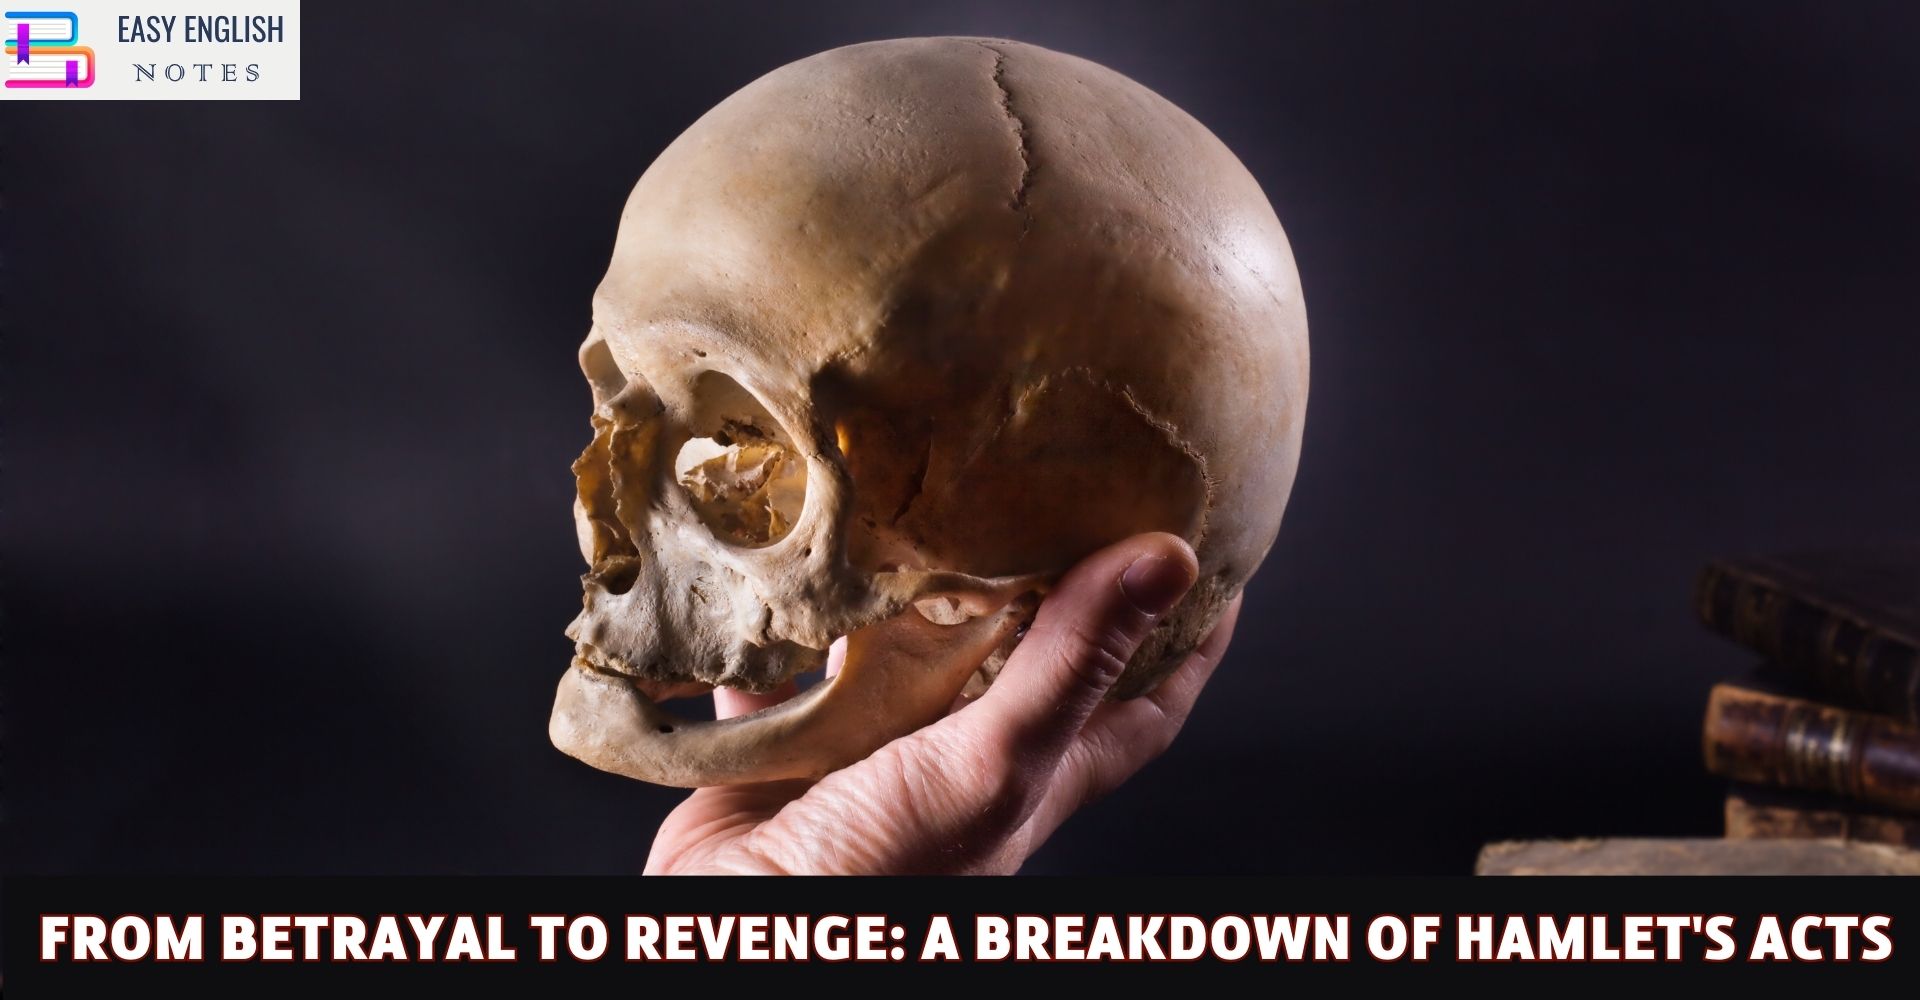 From Betrayal to Revenge: A Breakdown of Hamlet's Acts